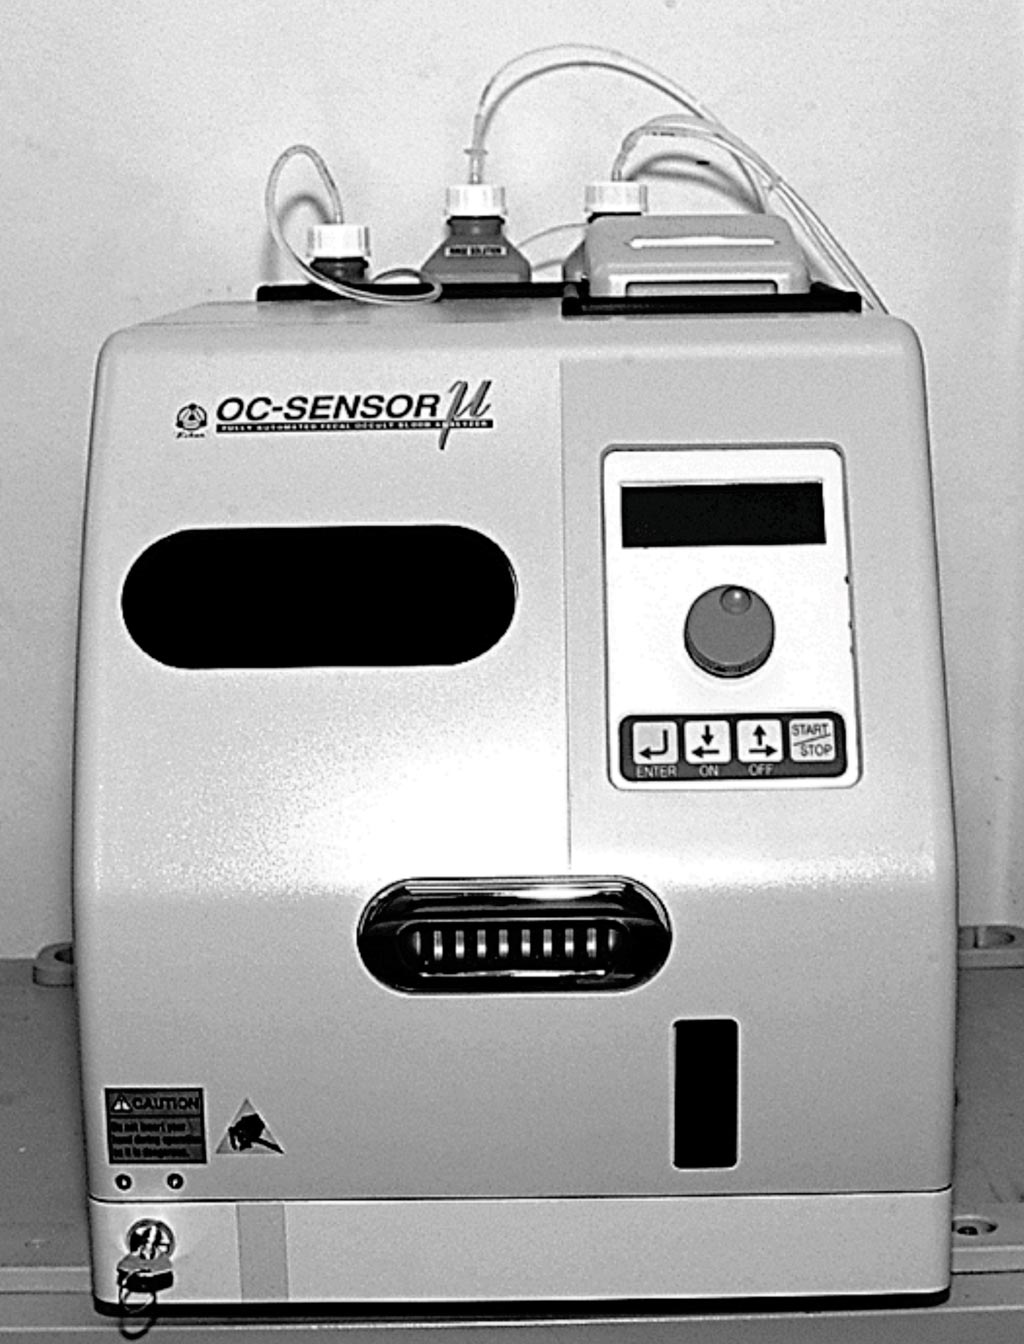 Image: The OC-Sensor apparatus used for the quantitative fecal immunochemical test screening for colorectal cancer (Photo courtesy of Eiken).